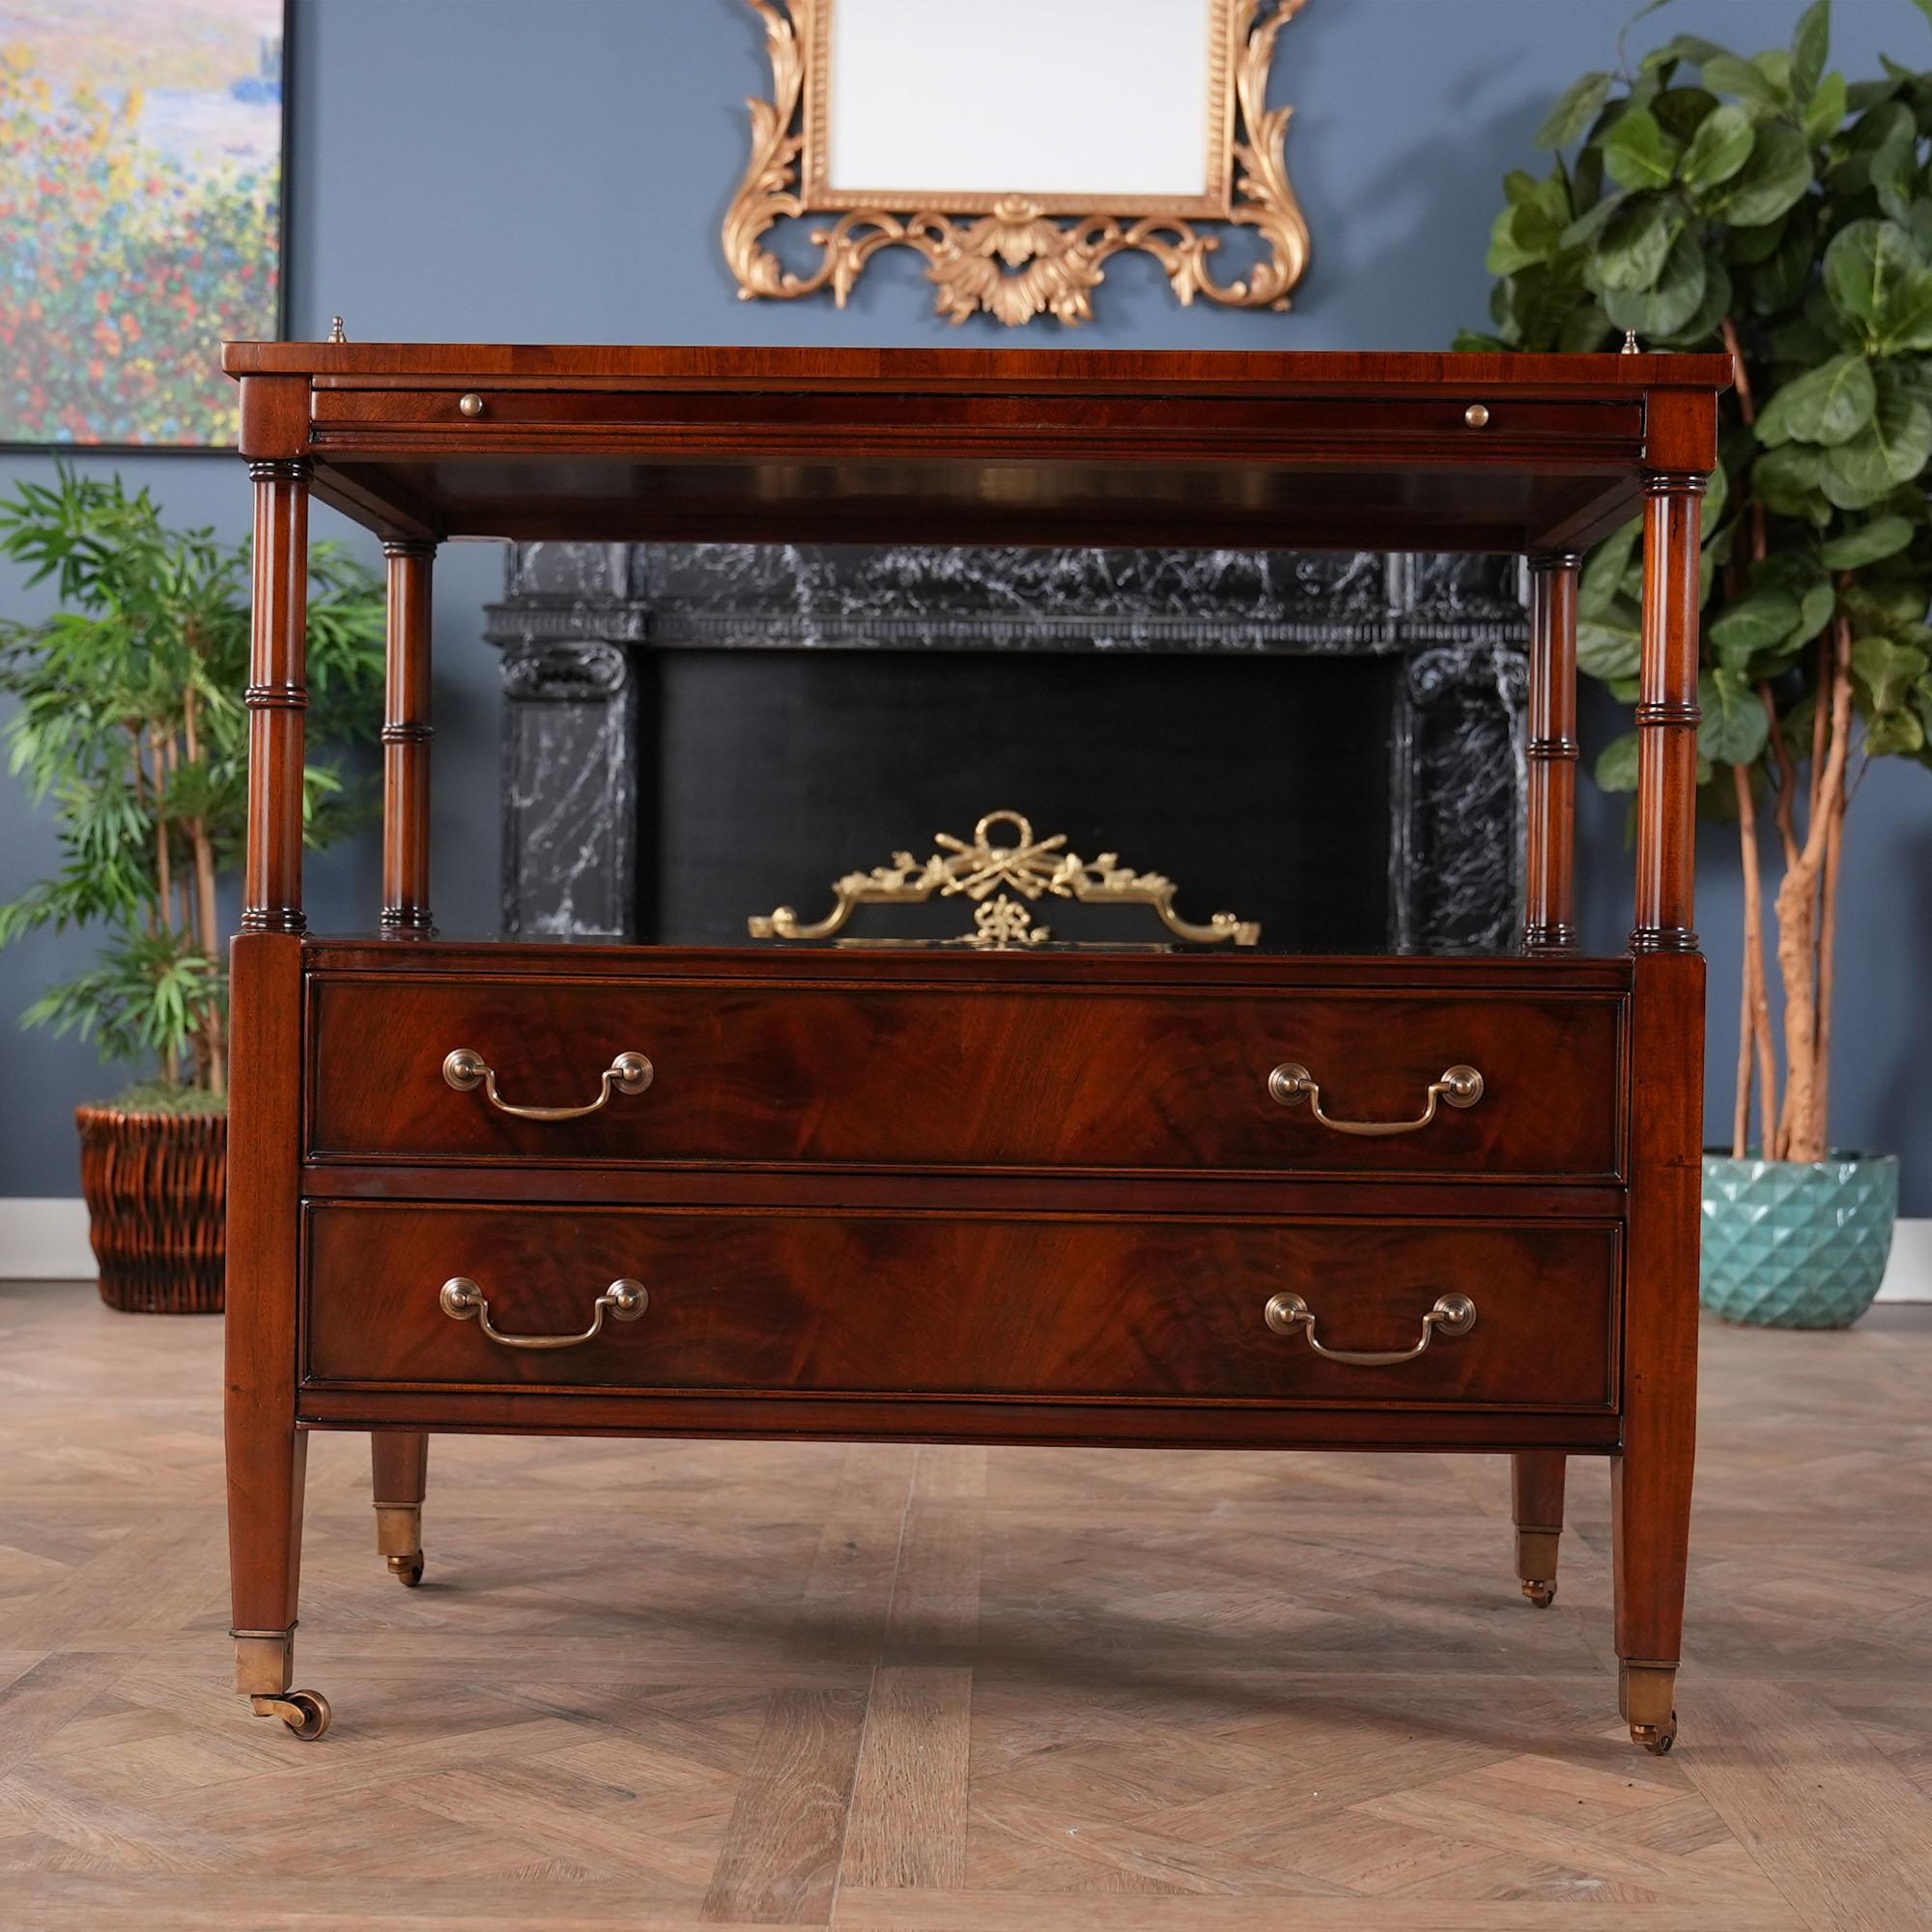 A most useful Two Drawer Server with Pullout Tray by Niagara Furniture. Great for use in the dining room this server has a lot of great features including solid brass wheels, two large drawers for storage, a display shelf over top the drawers and a